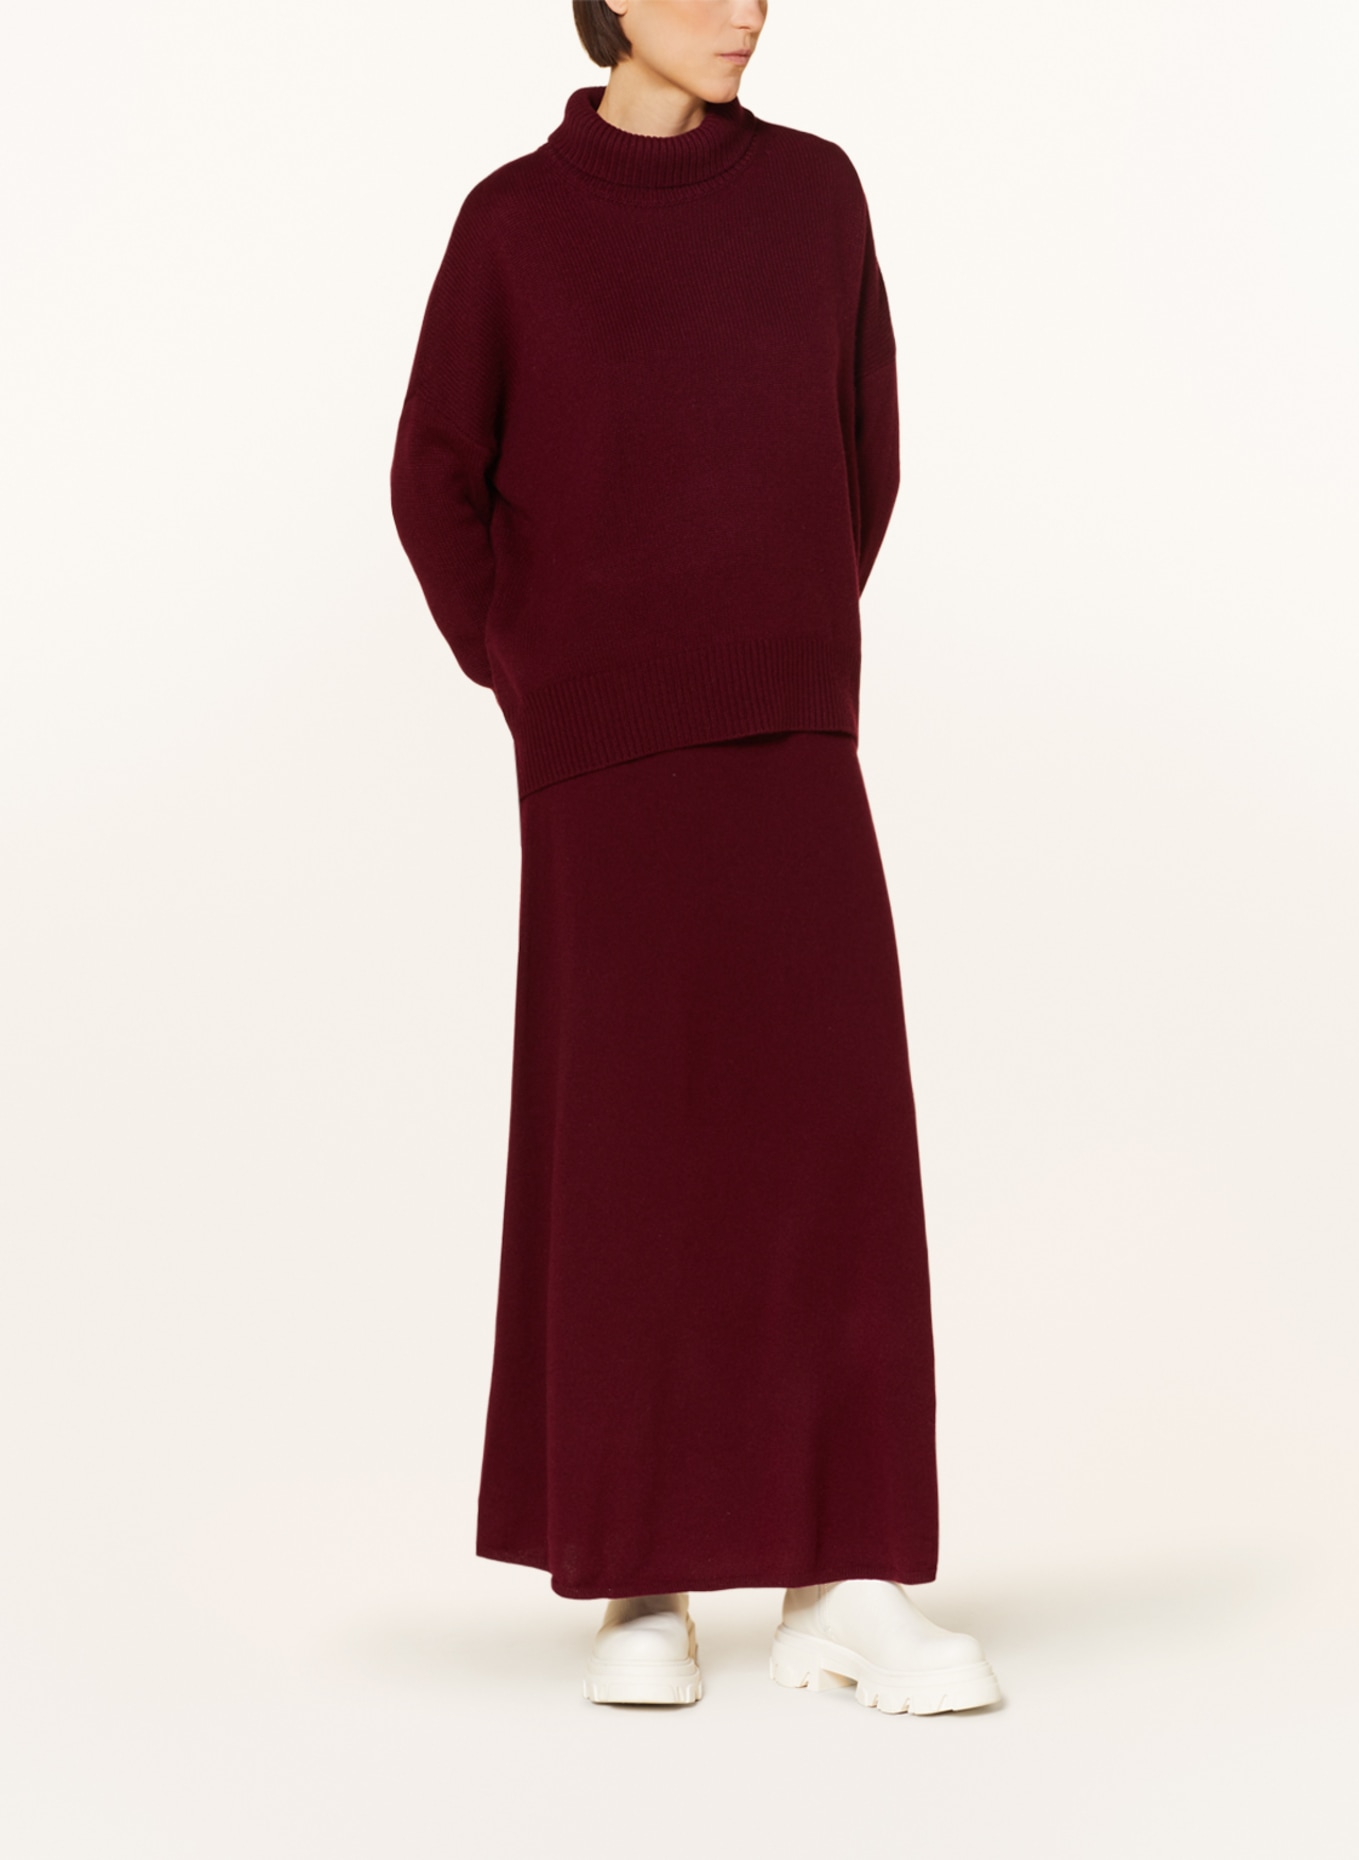 LISA YANG Knit skirt DOLLY made of cashmere, Color: DARK RED (Image 2)